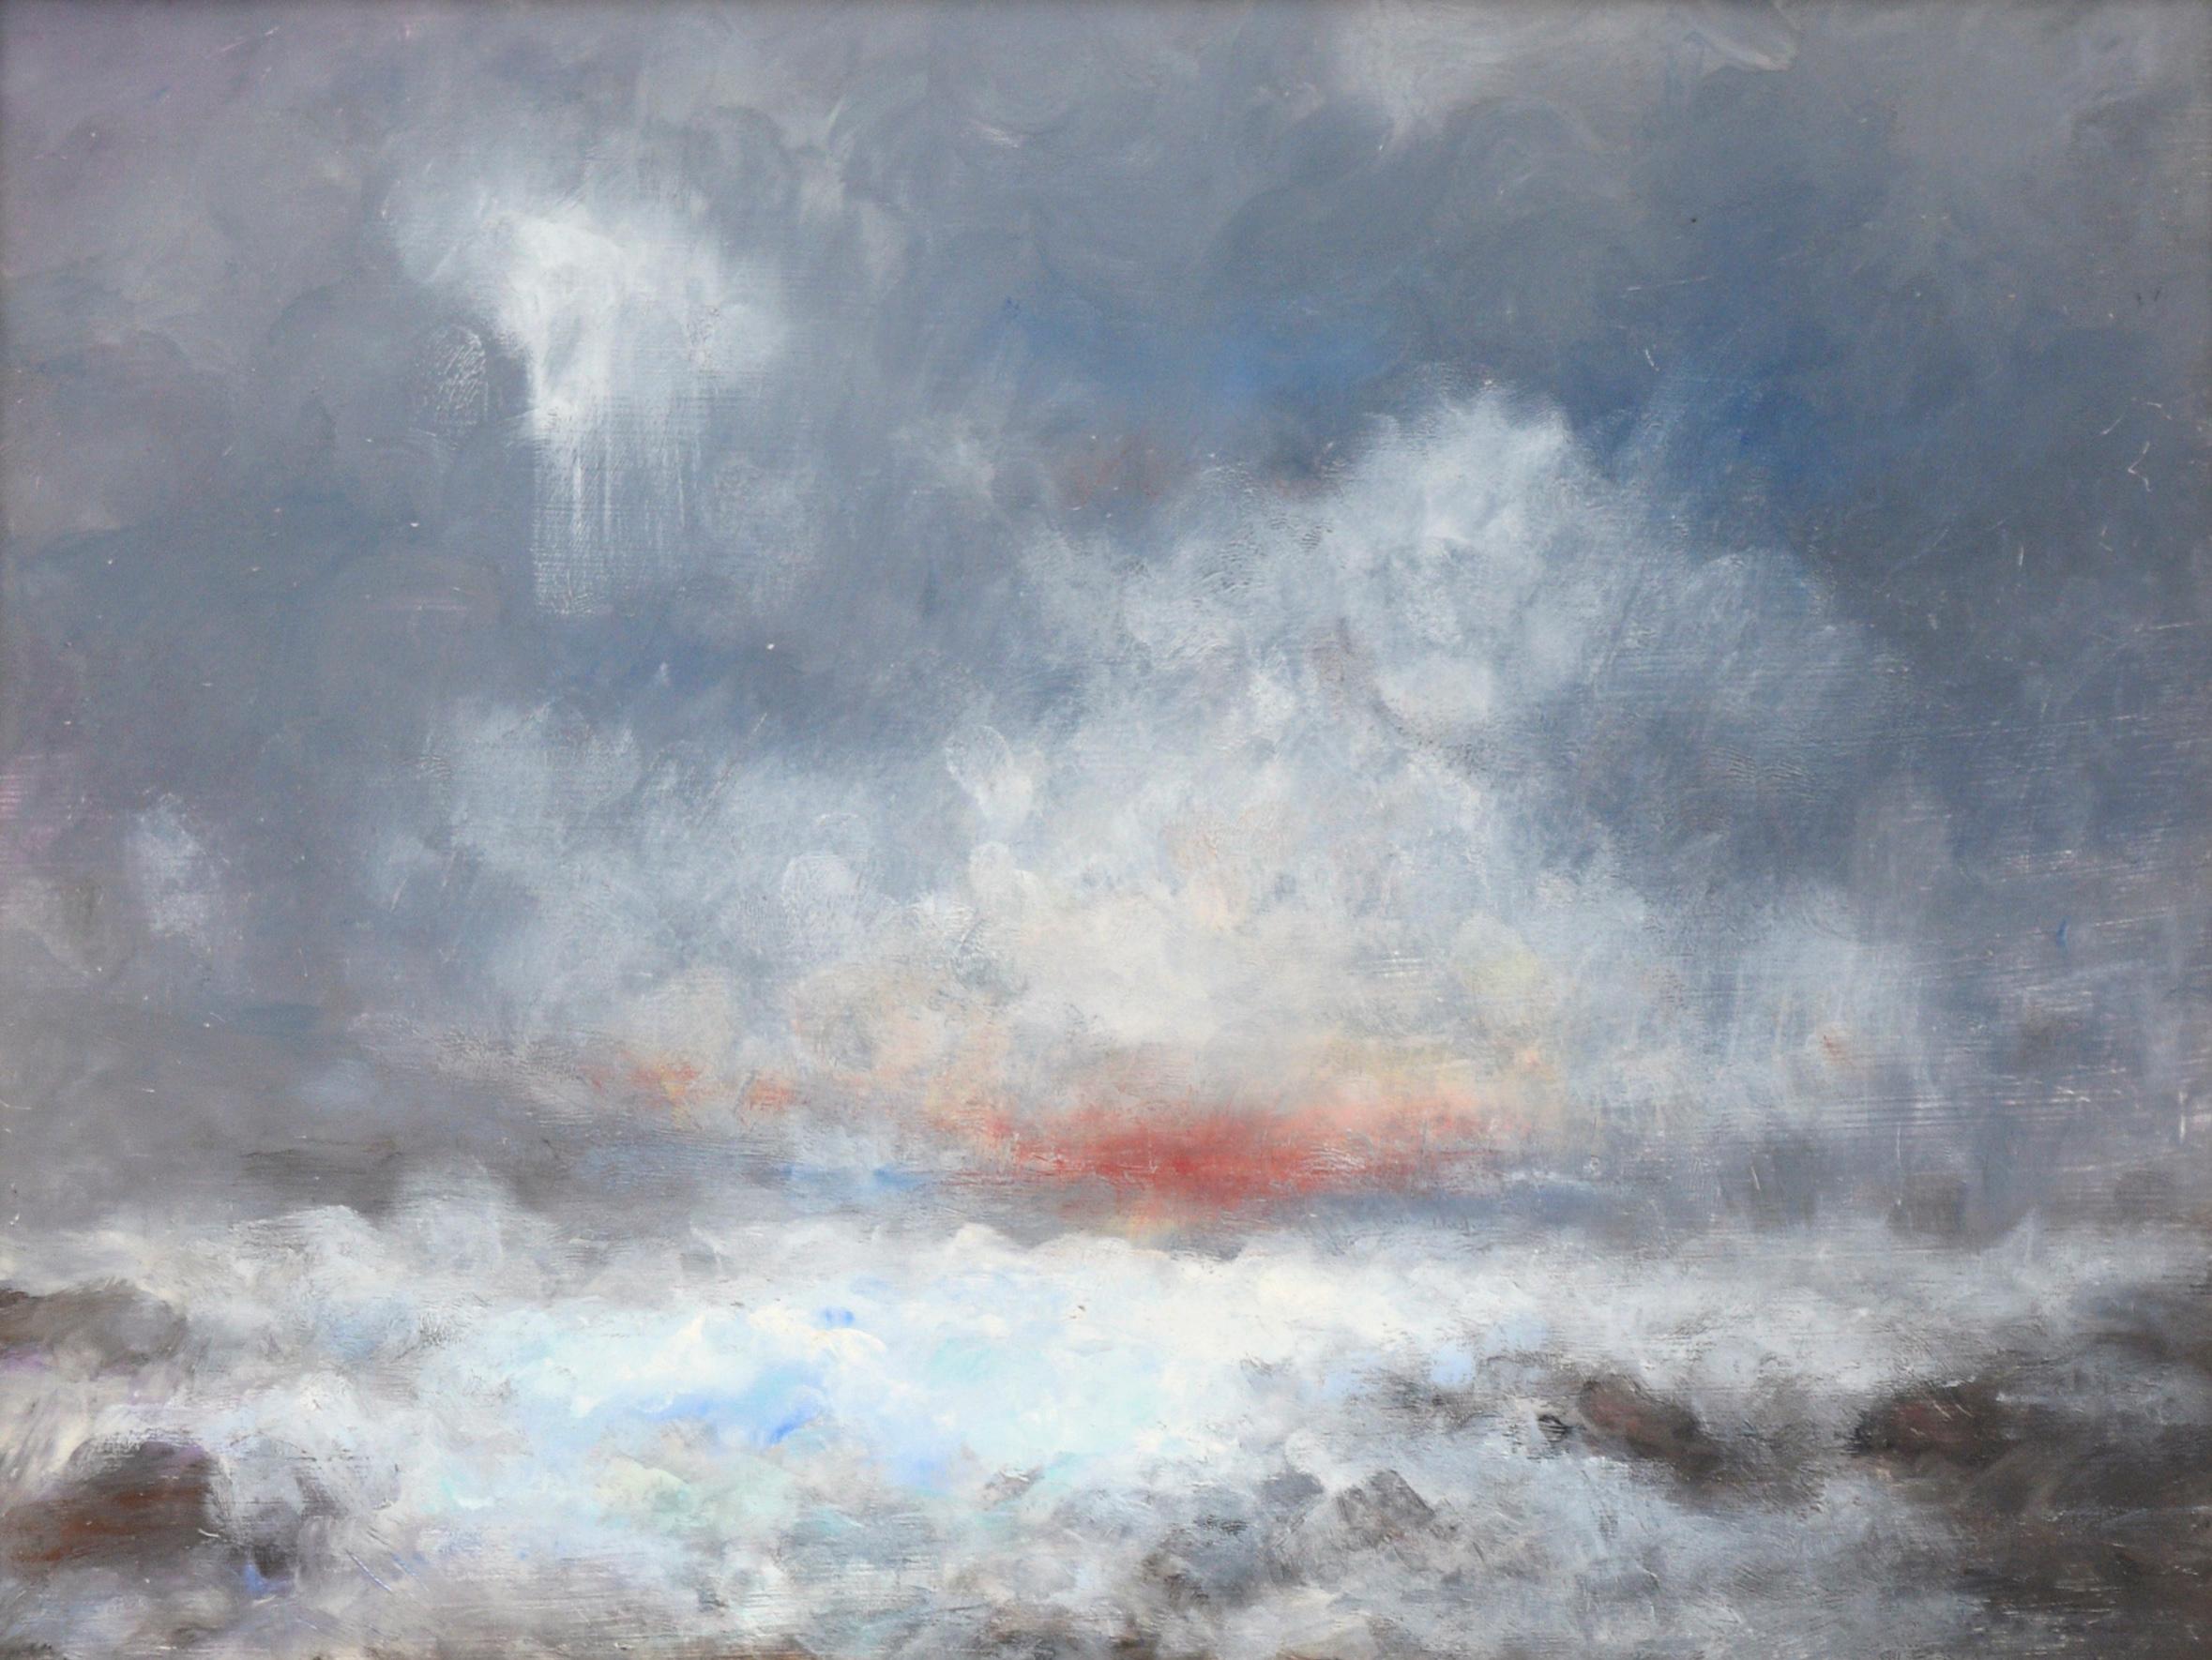 Storm Approaching Over the Sea - Seascape - Painting by Vasil Papkov